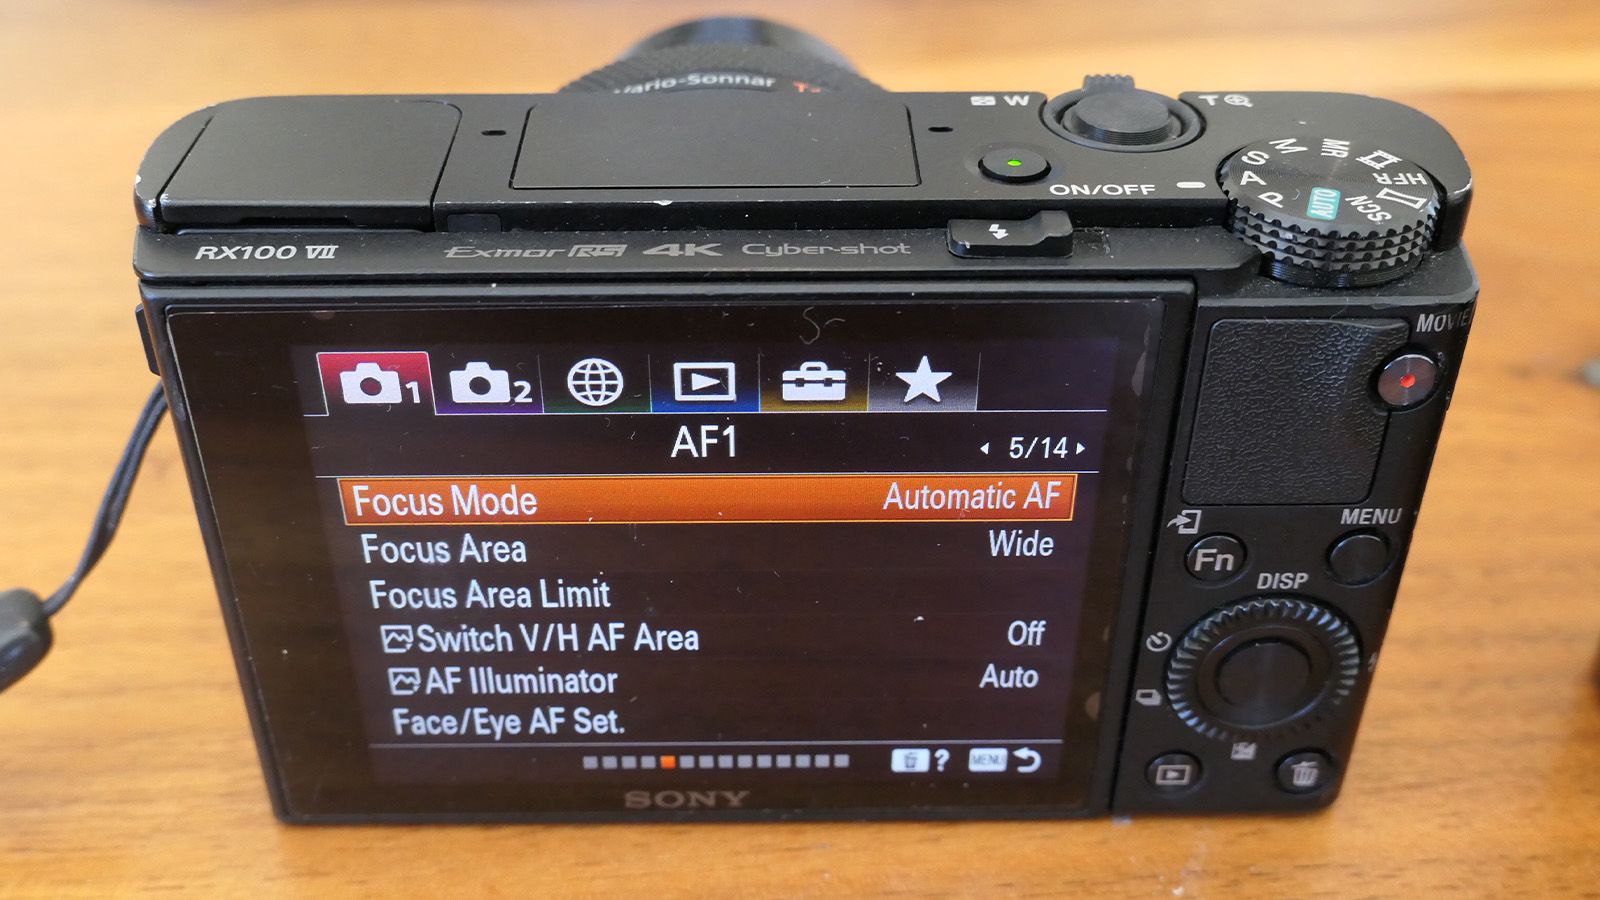 Best Compact & Point-and-Shoot Digital Camera, DSC-RX100